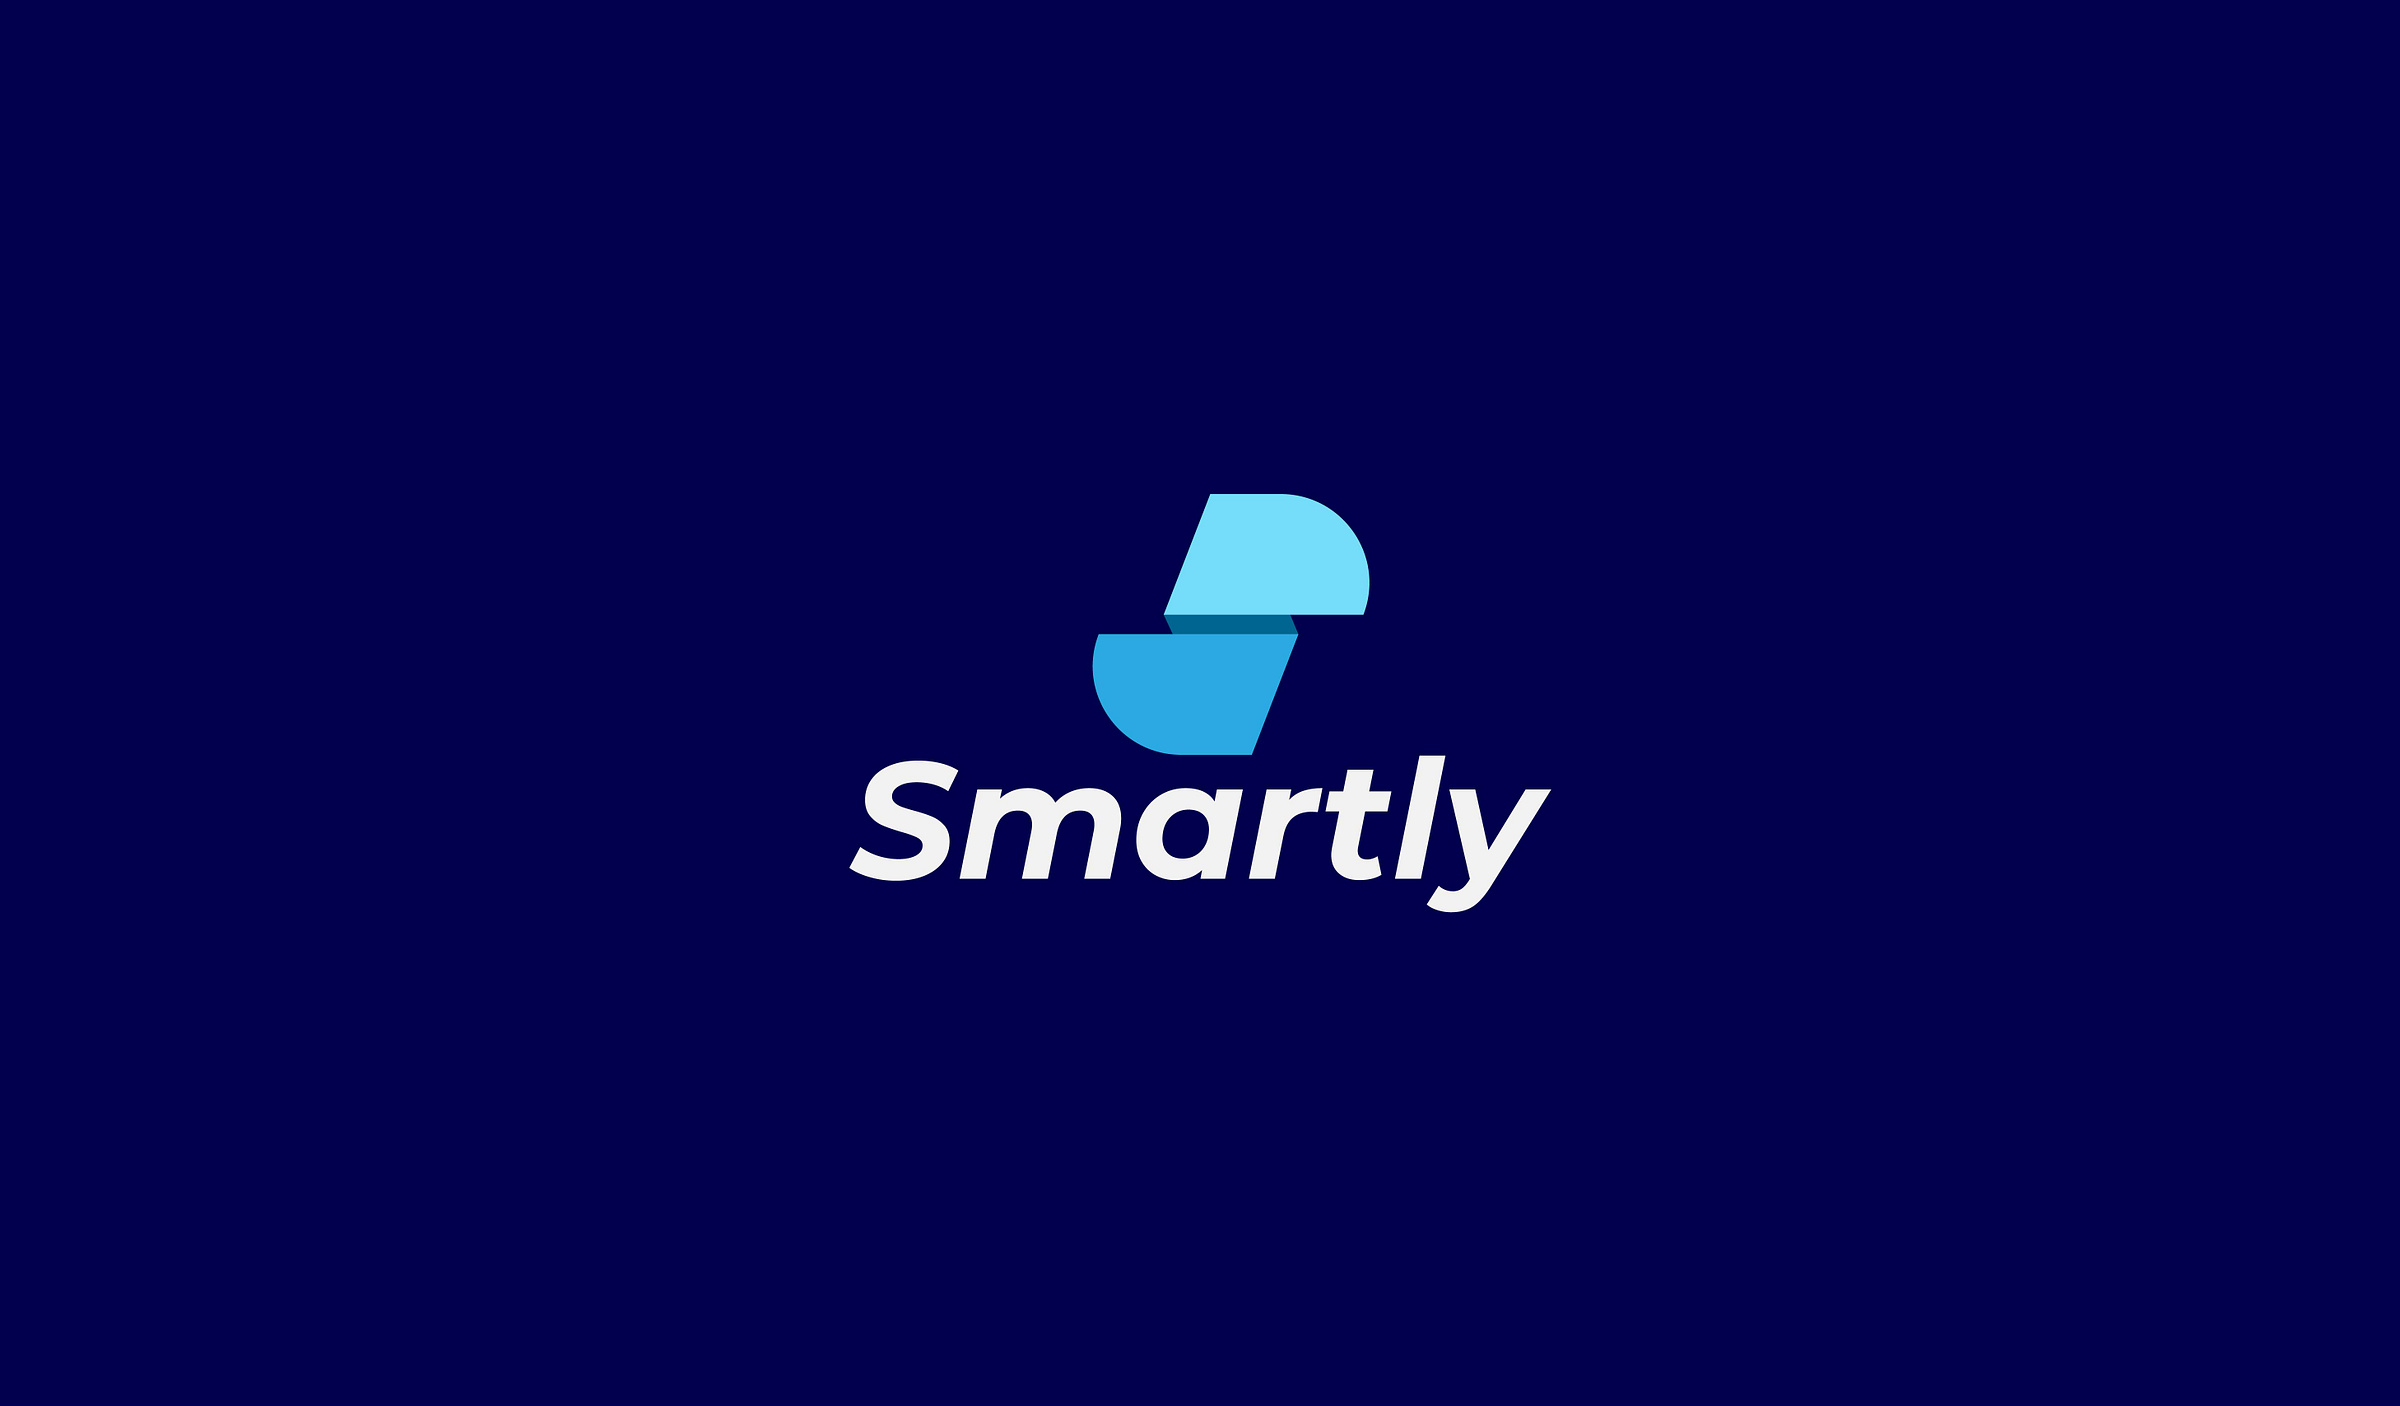 Smartly notes app logo design by Muhammad Sayed on Dribbble